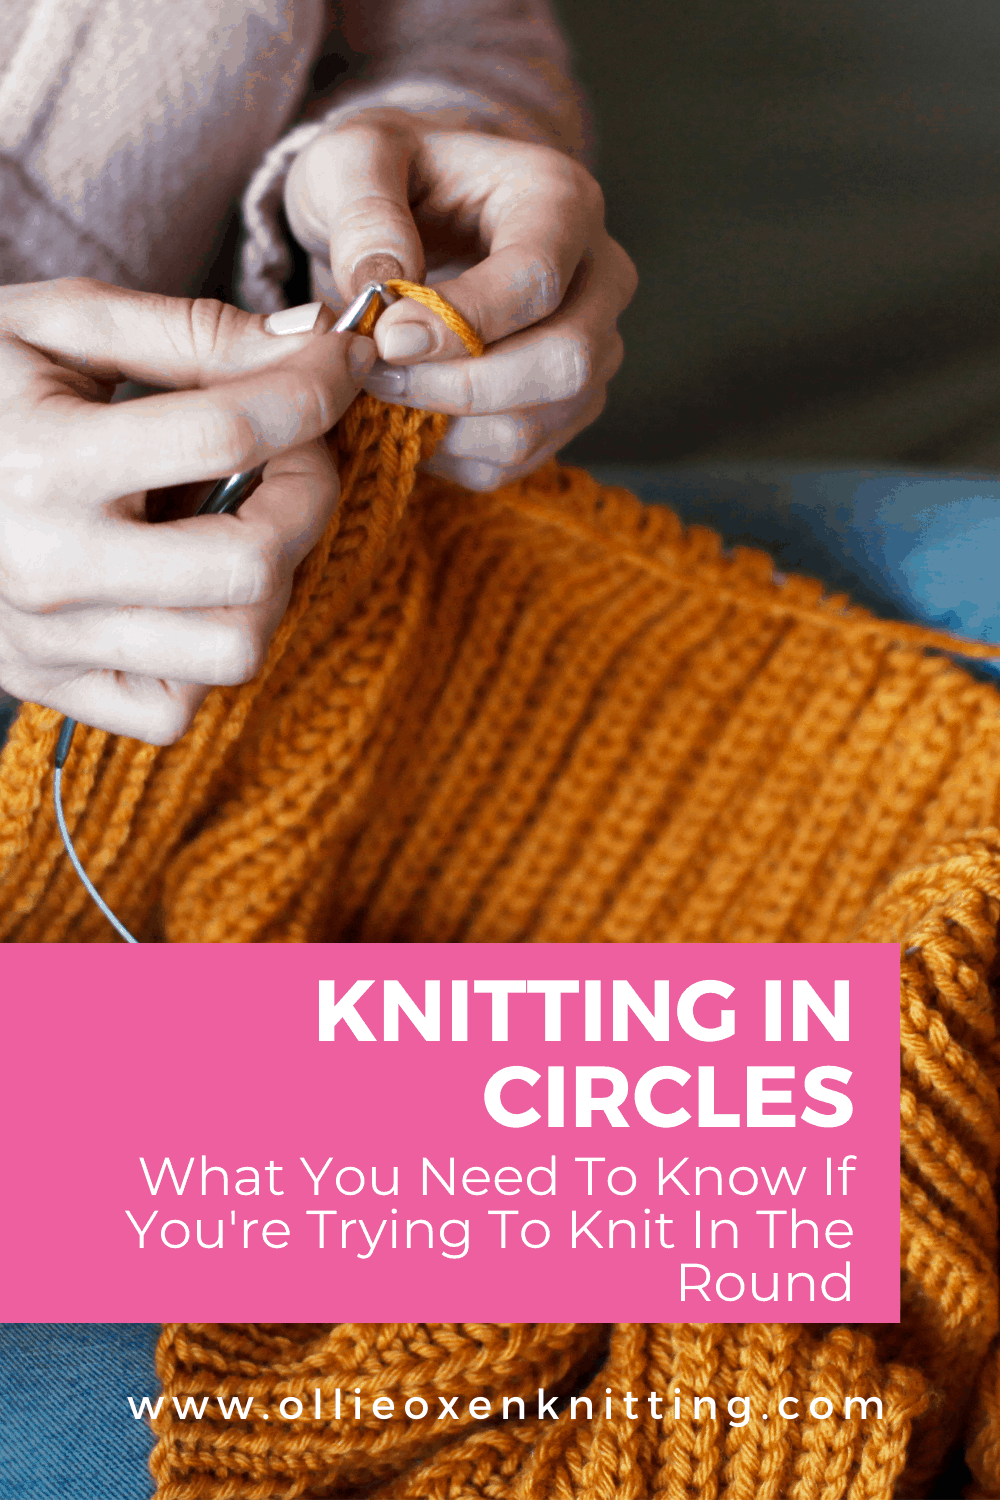 Knitting In Circles: What You Need To Know If You're Trying To Knit In The Round | Ollie Oxen Knitting